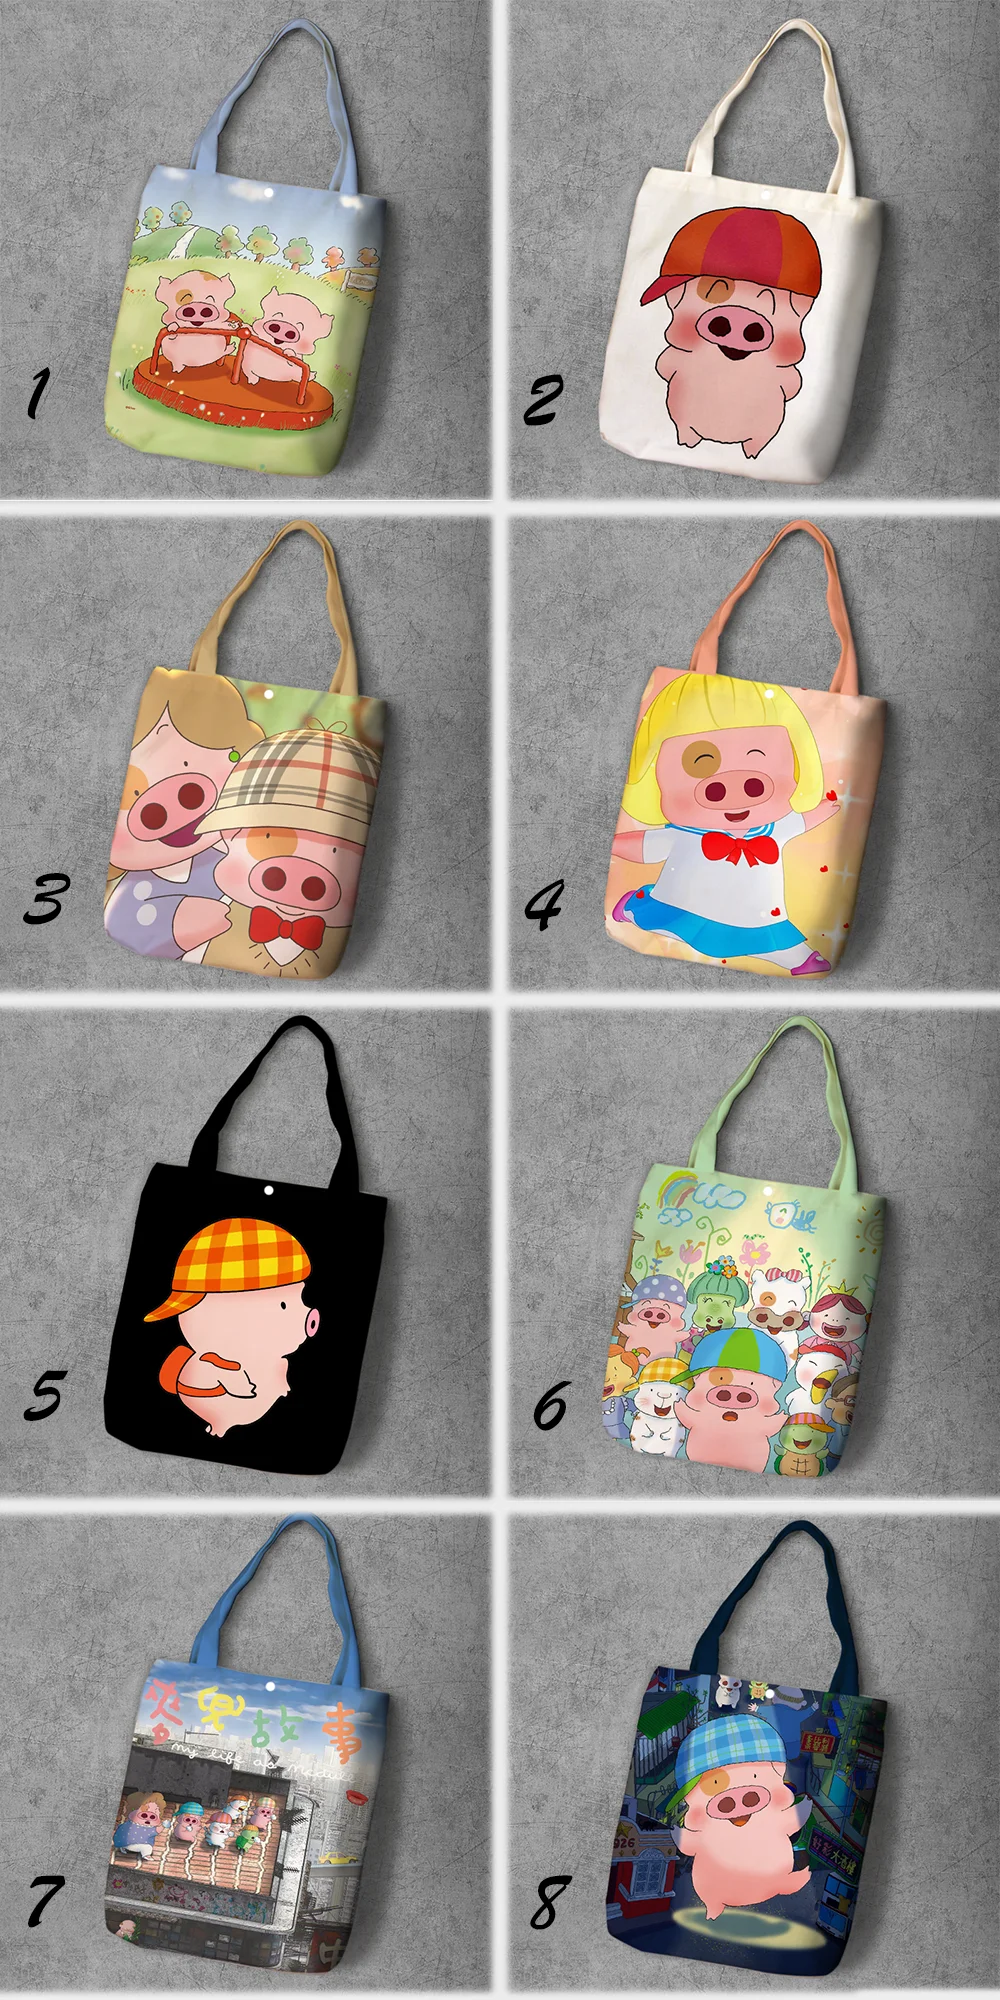 

Mcdull Pig Cartoon Student Printed Recycle Canvas Shopping Bag Large Capacity Customize Tote Fashion Lady Casual Shoulder Bags